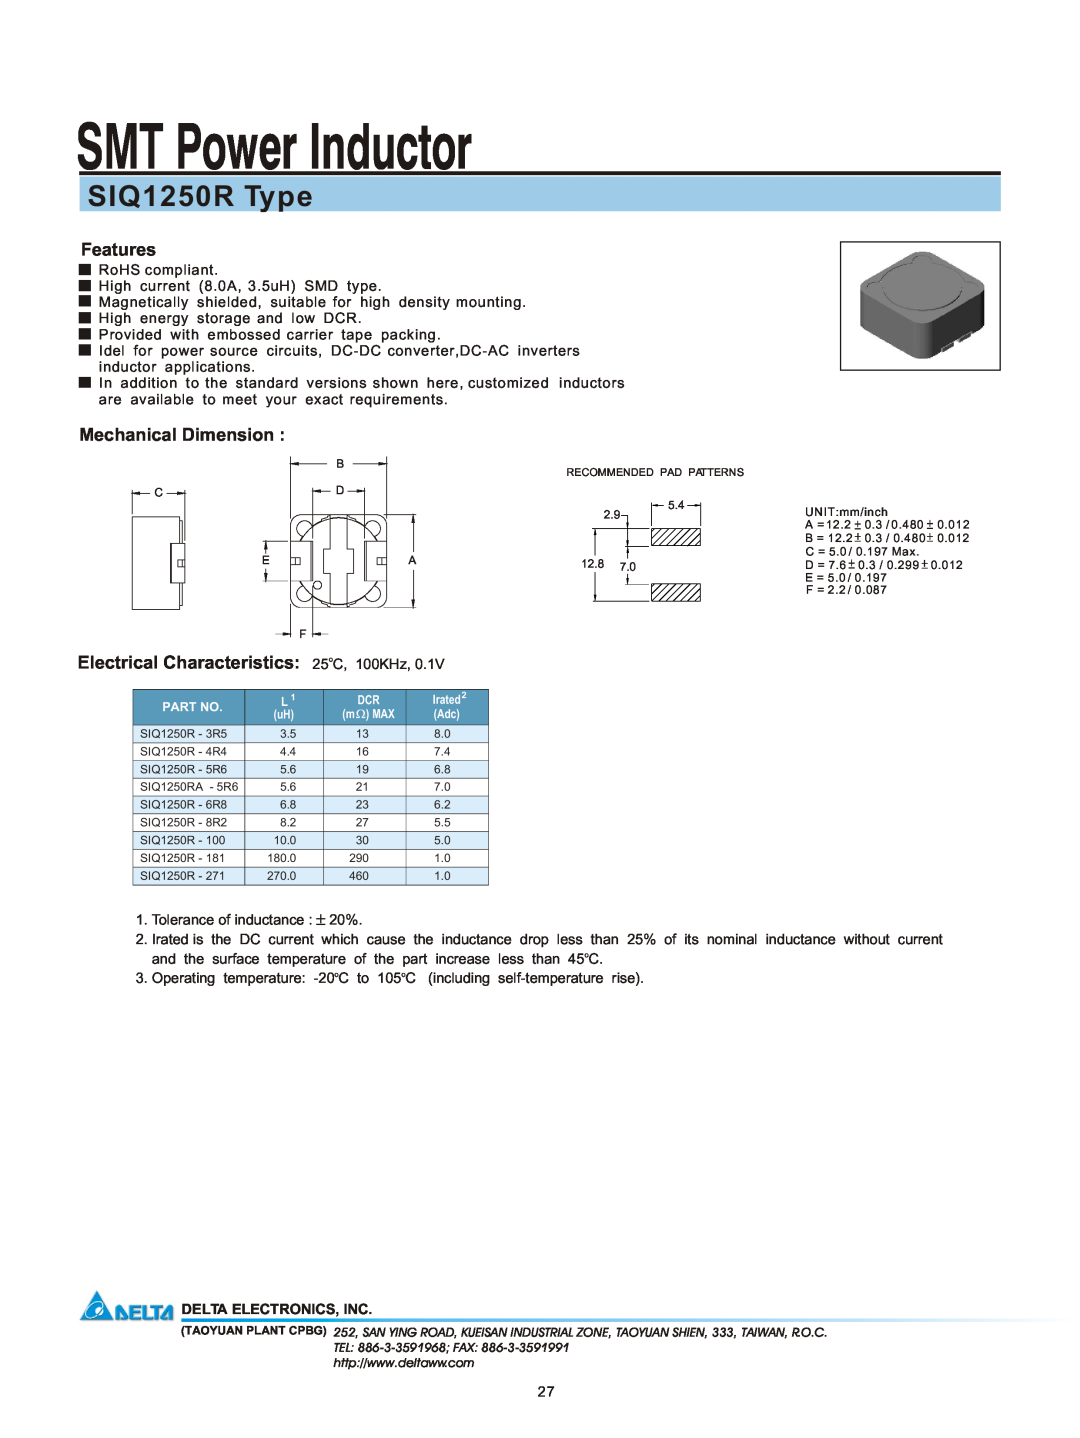 Delta Electronics manual SMT Power Inductor, SIQ1250R Type, Features, Mechanical Dimension, Delta Electronics, Inc 